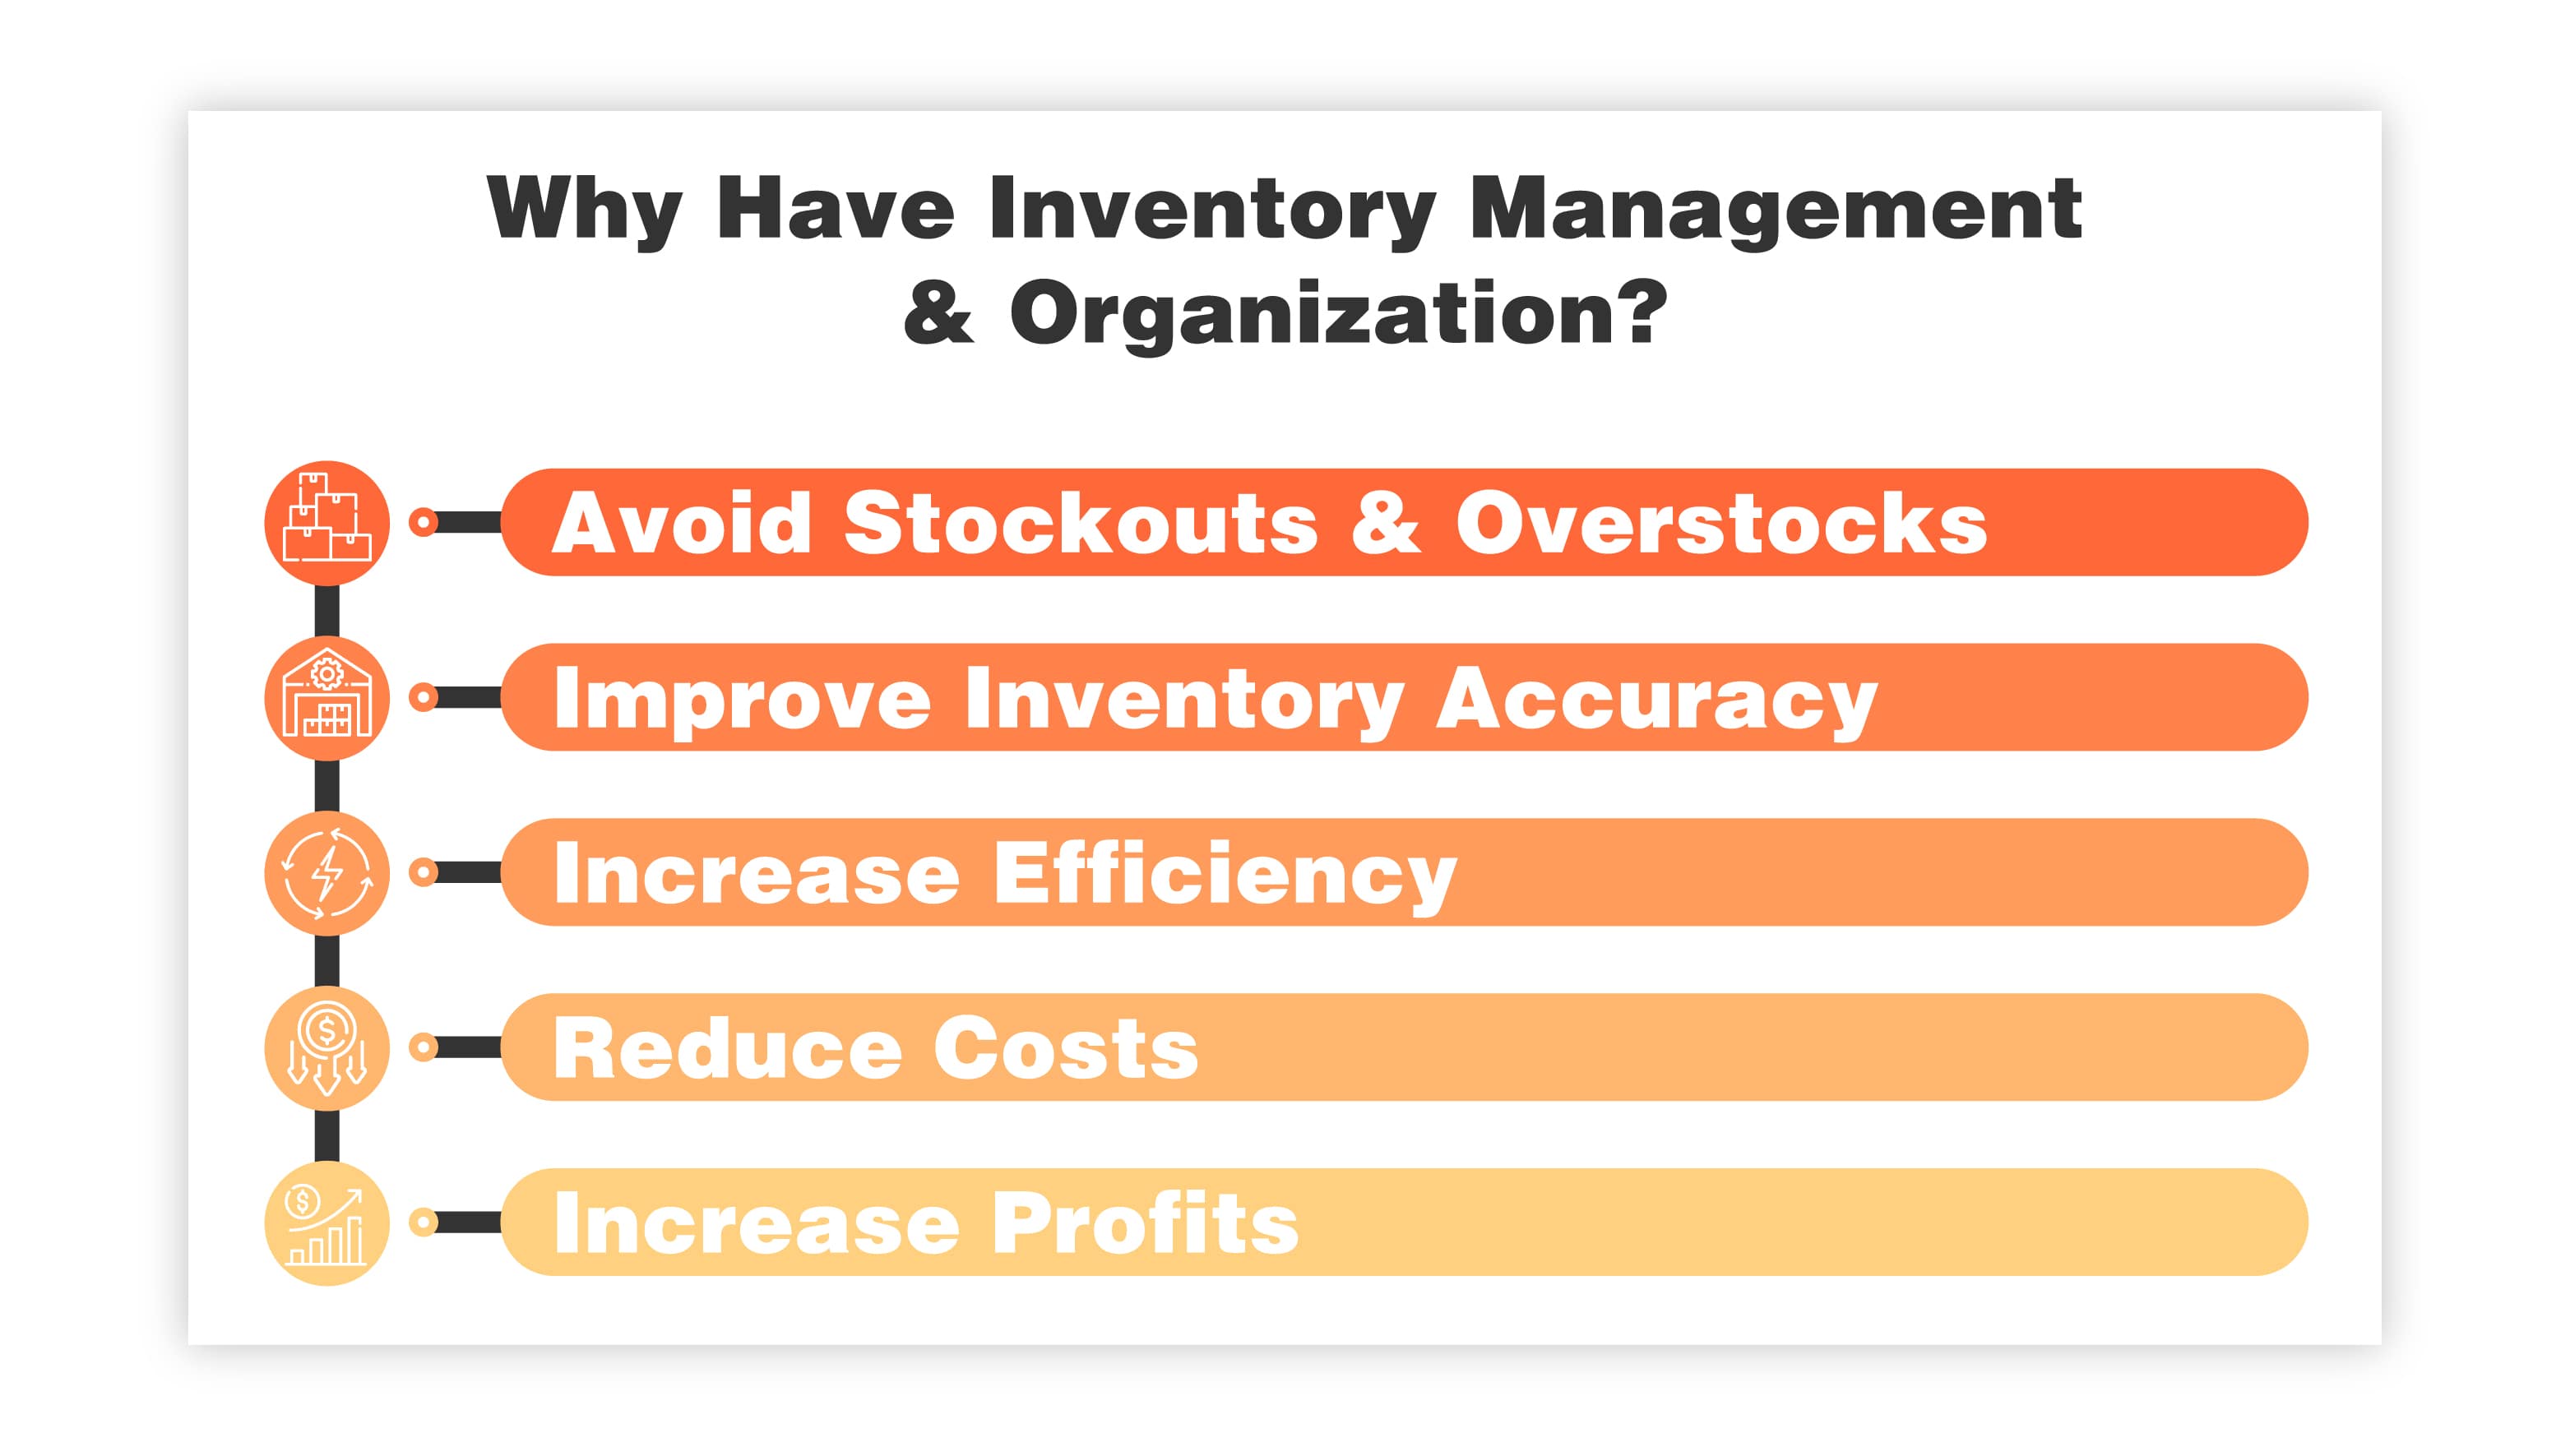 Why Have Inventory Management & Organization?